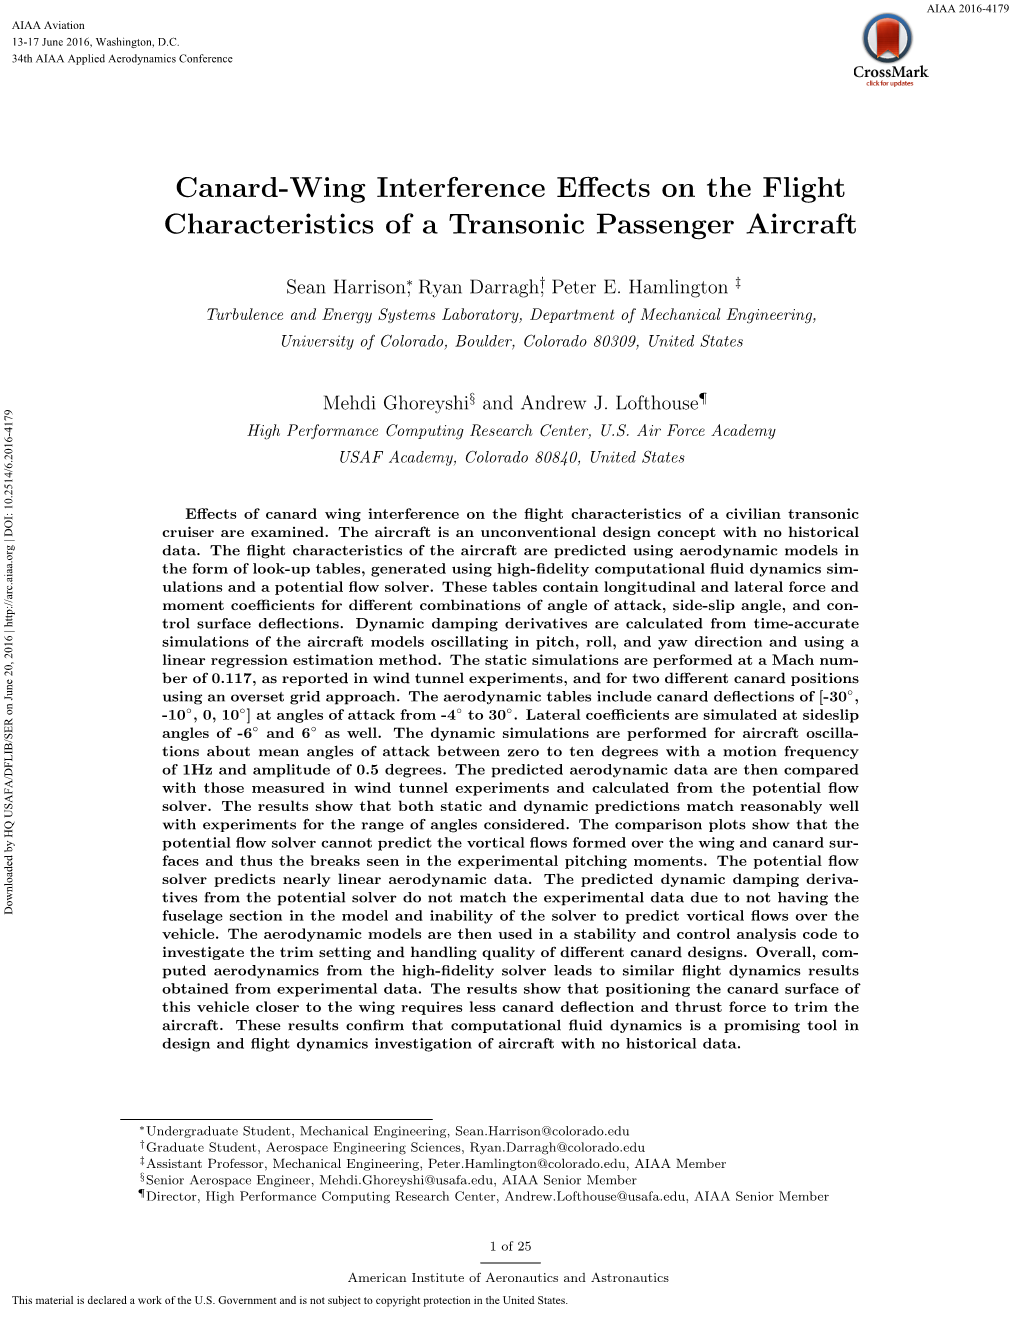 Canard-Wing Interference Effects on the Flight Characteristics of a Transonic Passenger Aircraft